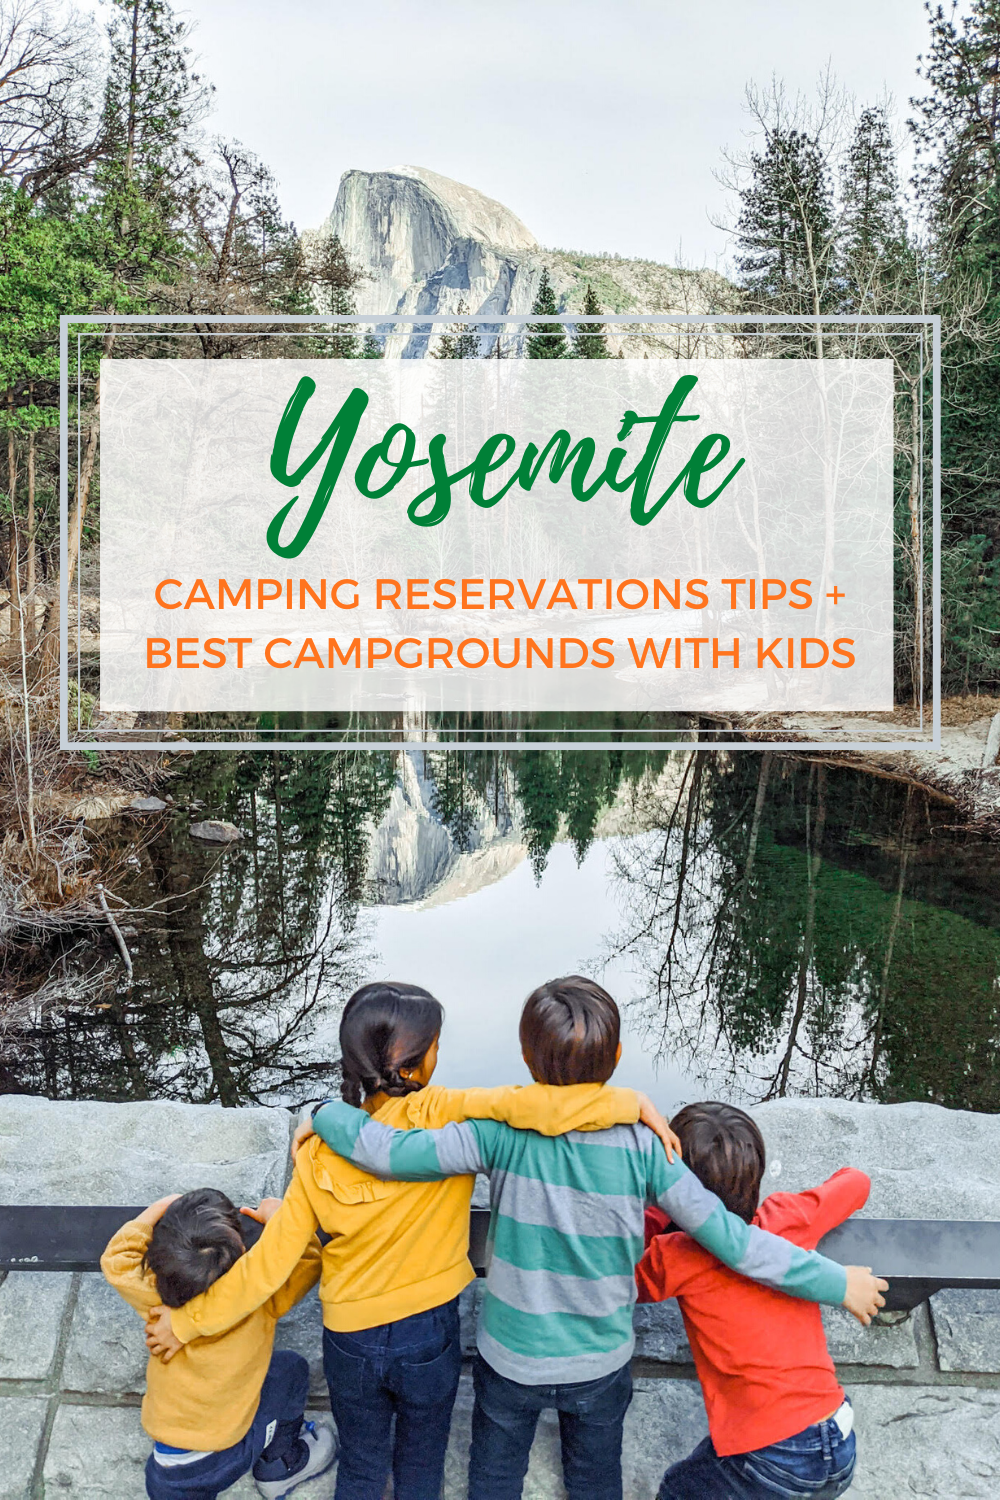 yosemite camping reservations tips for families